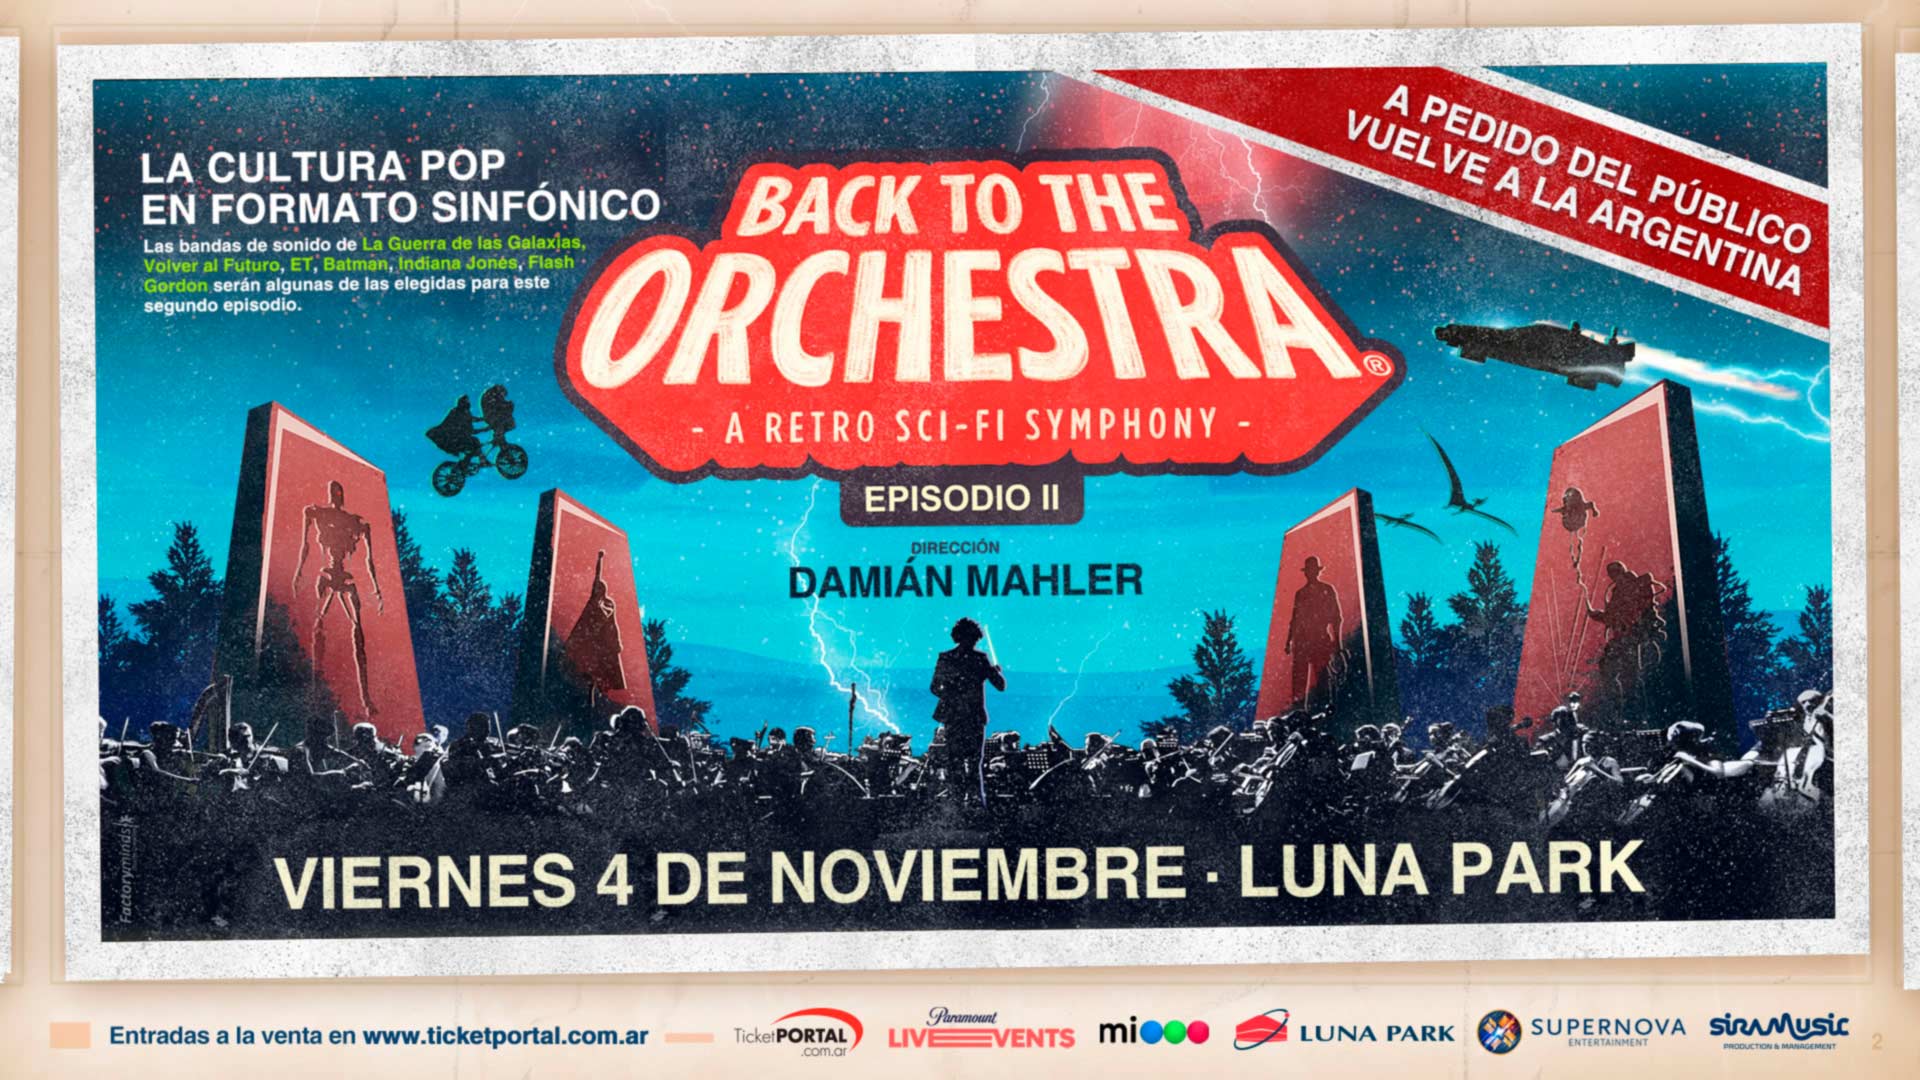 BACK TO THE ORCHESTRA